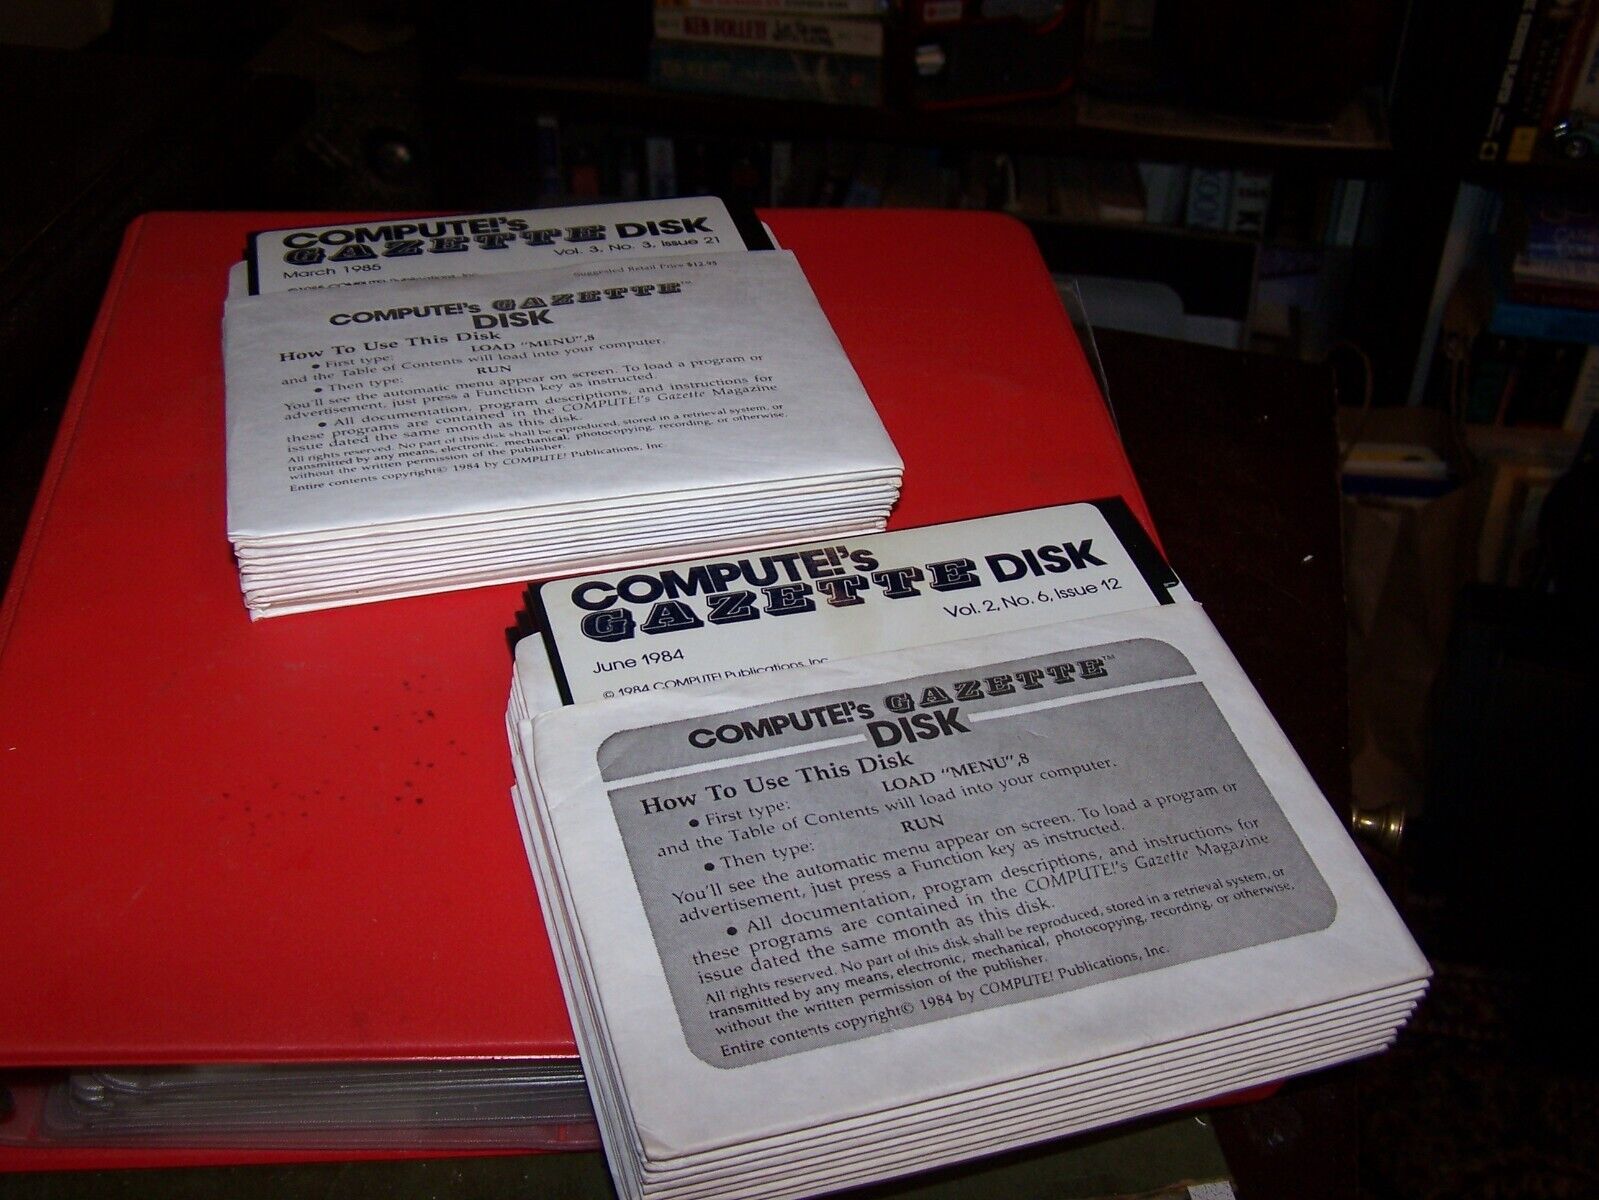 Lot of 20 Compute\'s Gazette Disks from mid 80\'s for Commodore 64 (Lot #1)